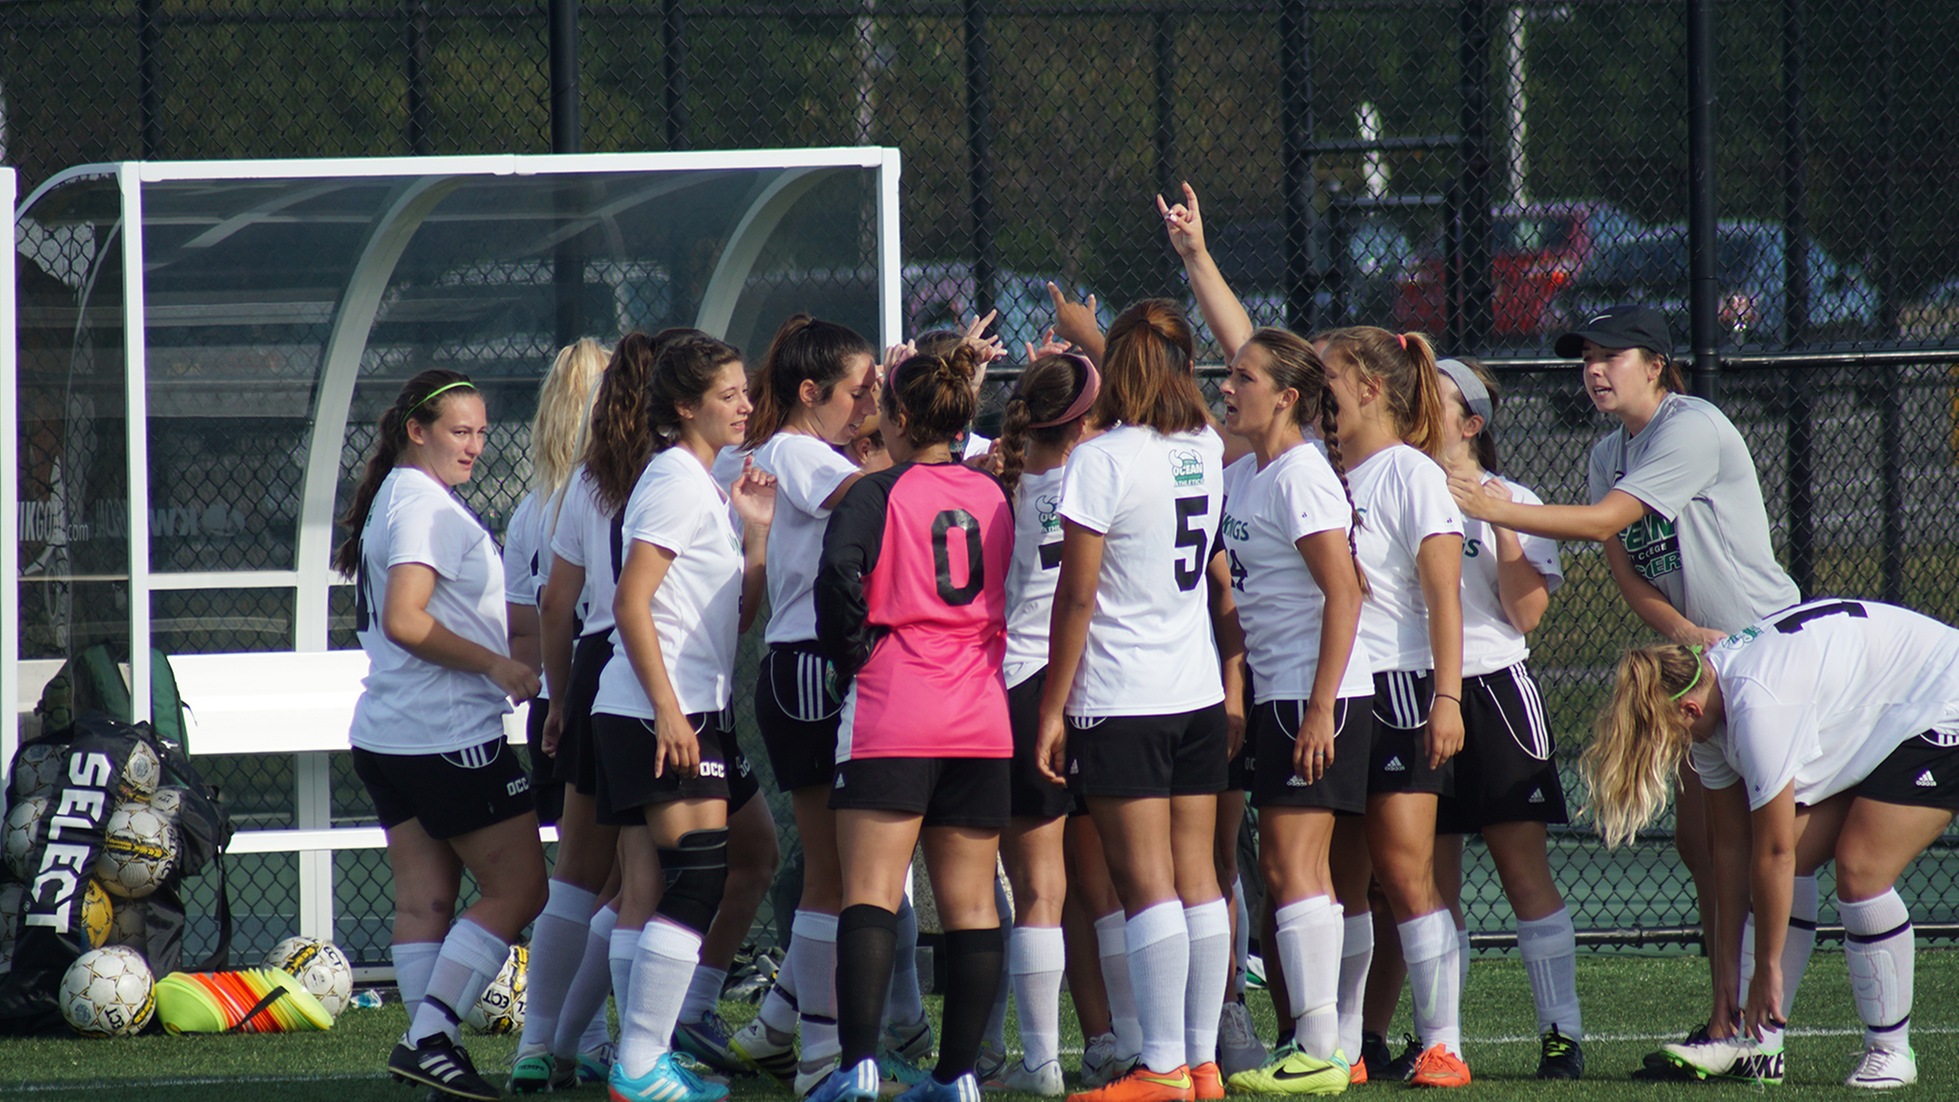 Vikings Fall to Brookdale CC, 3-2 in 1st Round of Region XIX Playoffs